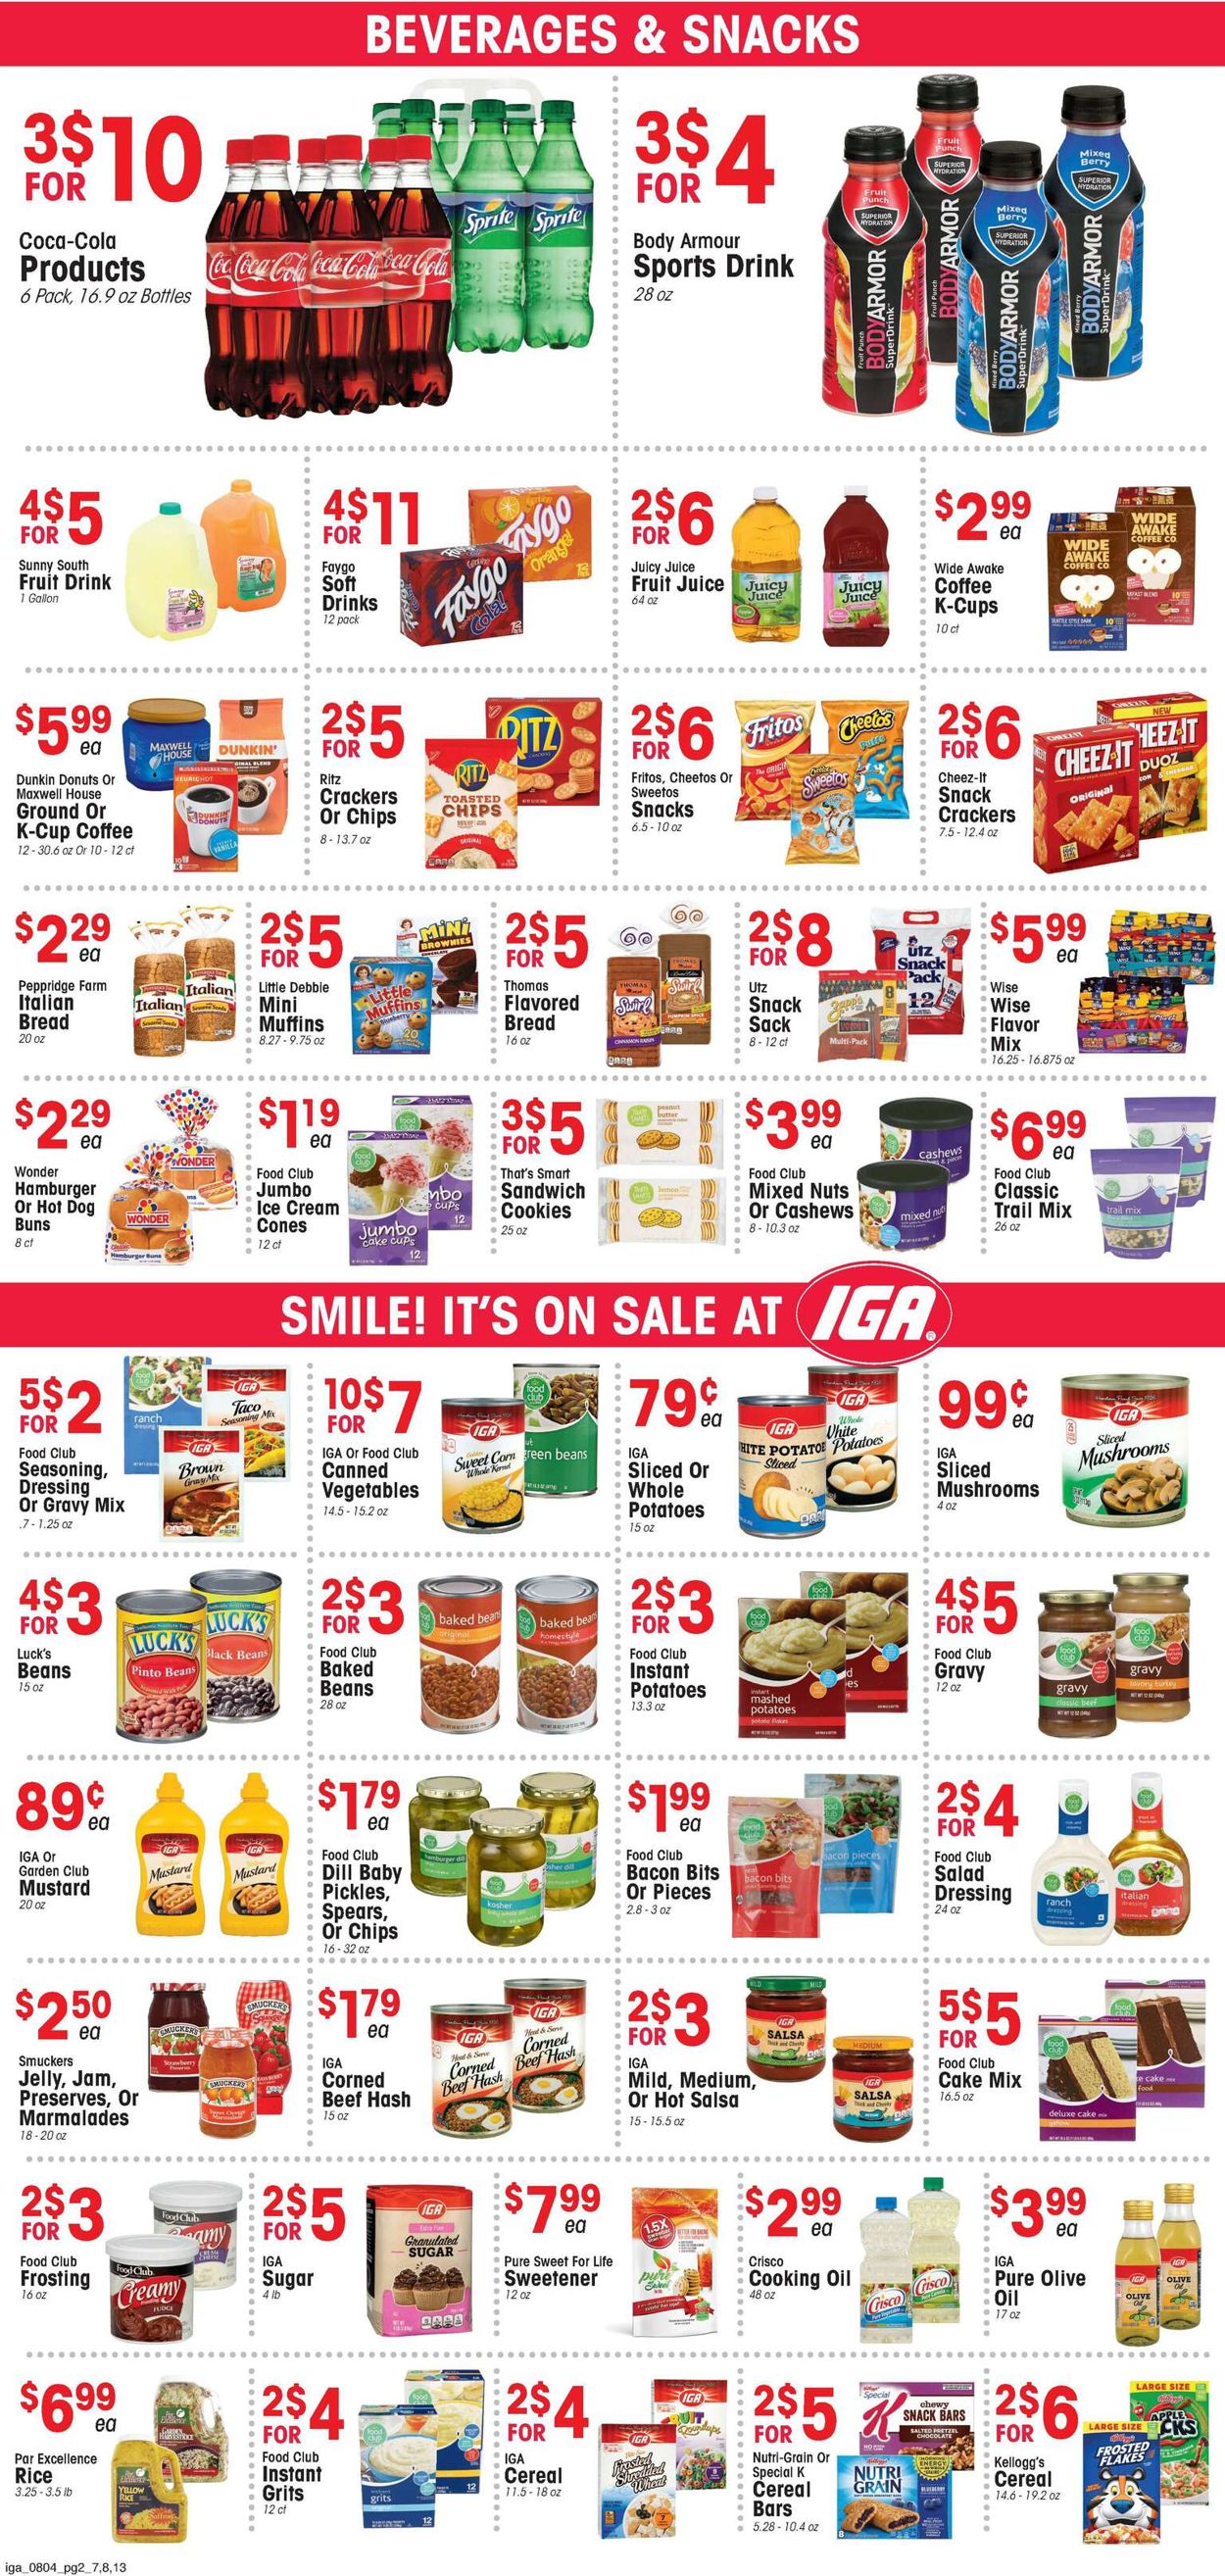 IGA Current weekly ad 08/11 - 08/17/2021 [2] - frequent-ads.com